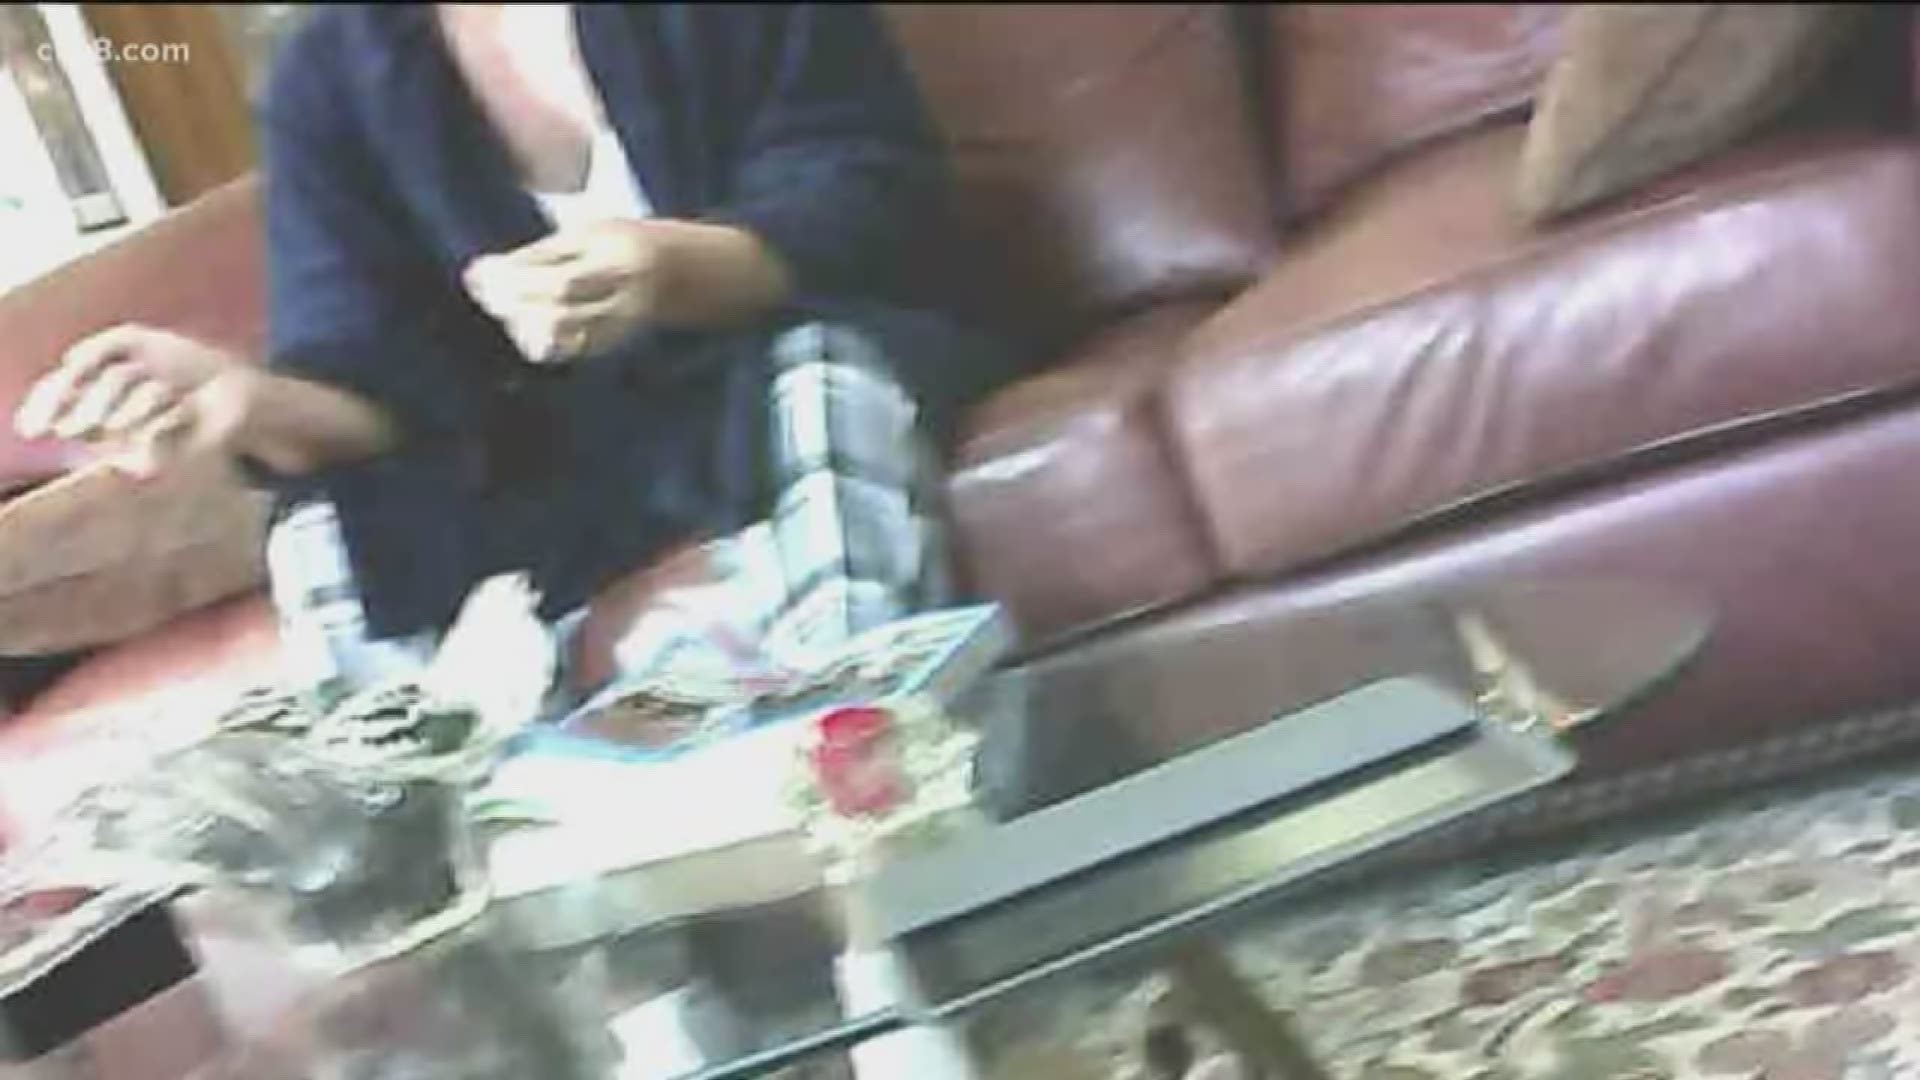 News 8 obtained shaky detective video from 2014 you'll only find here.